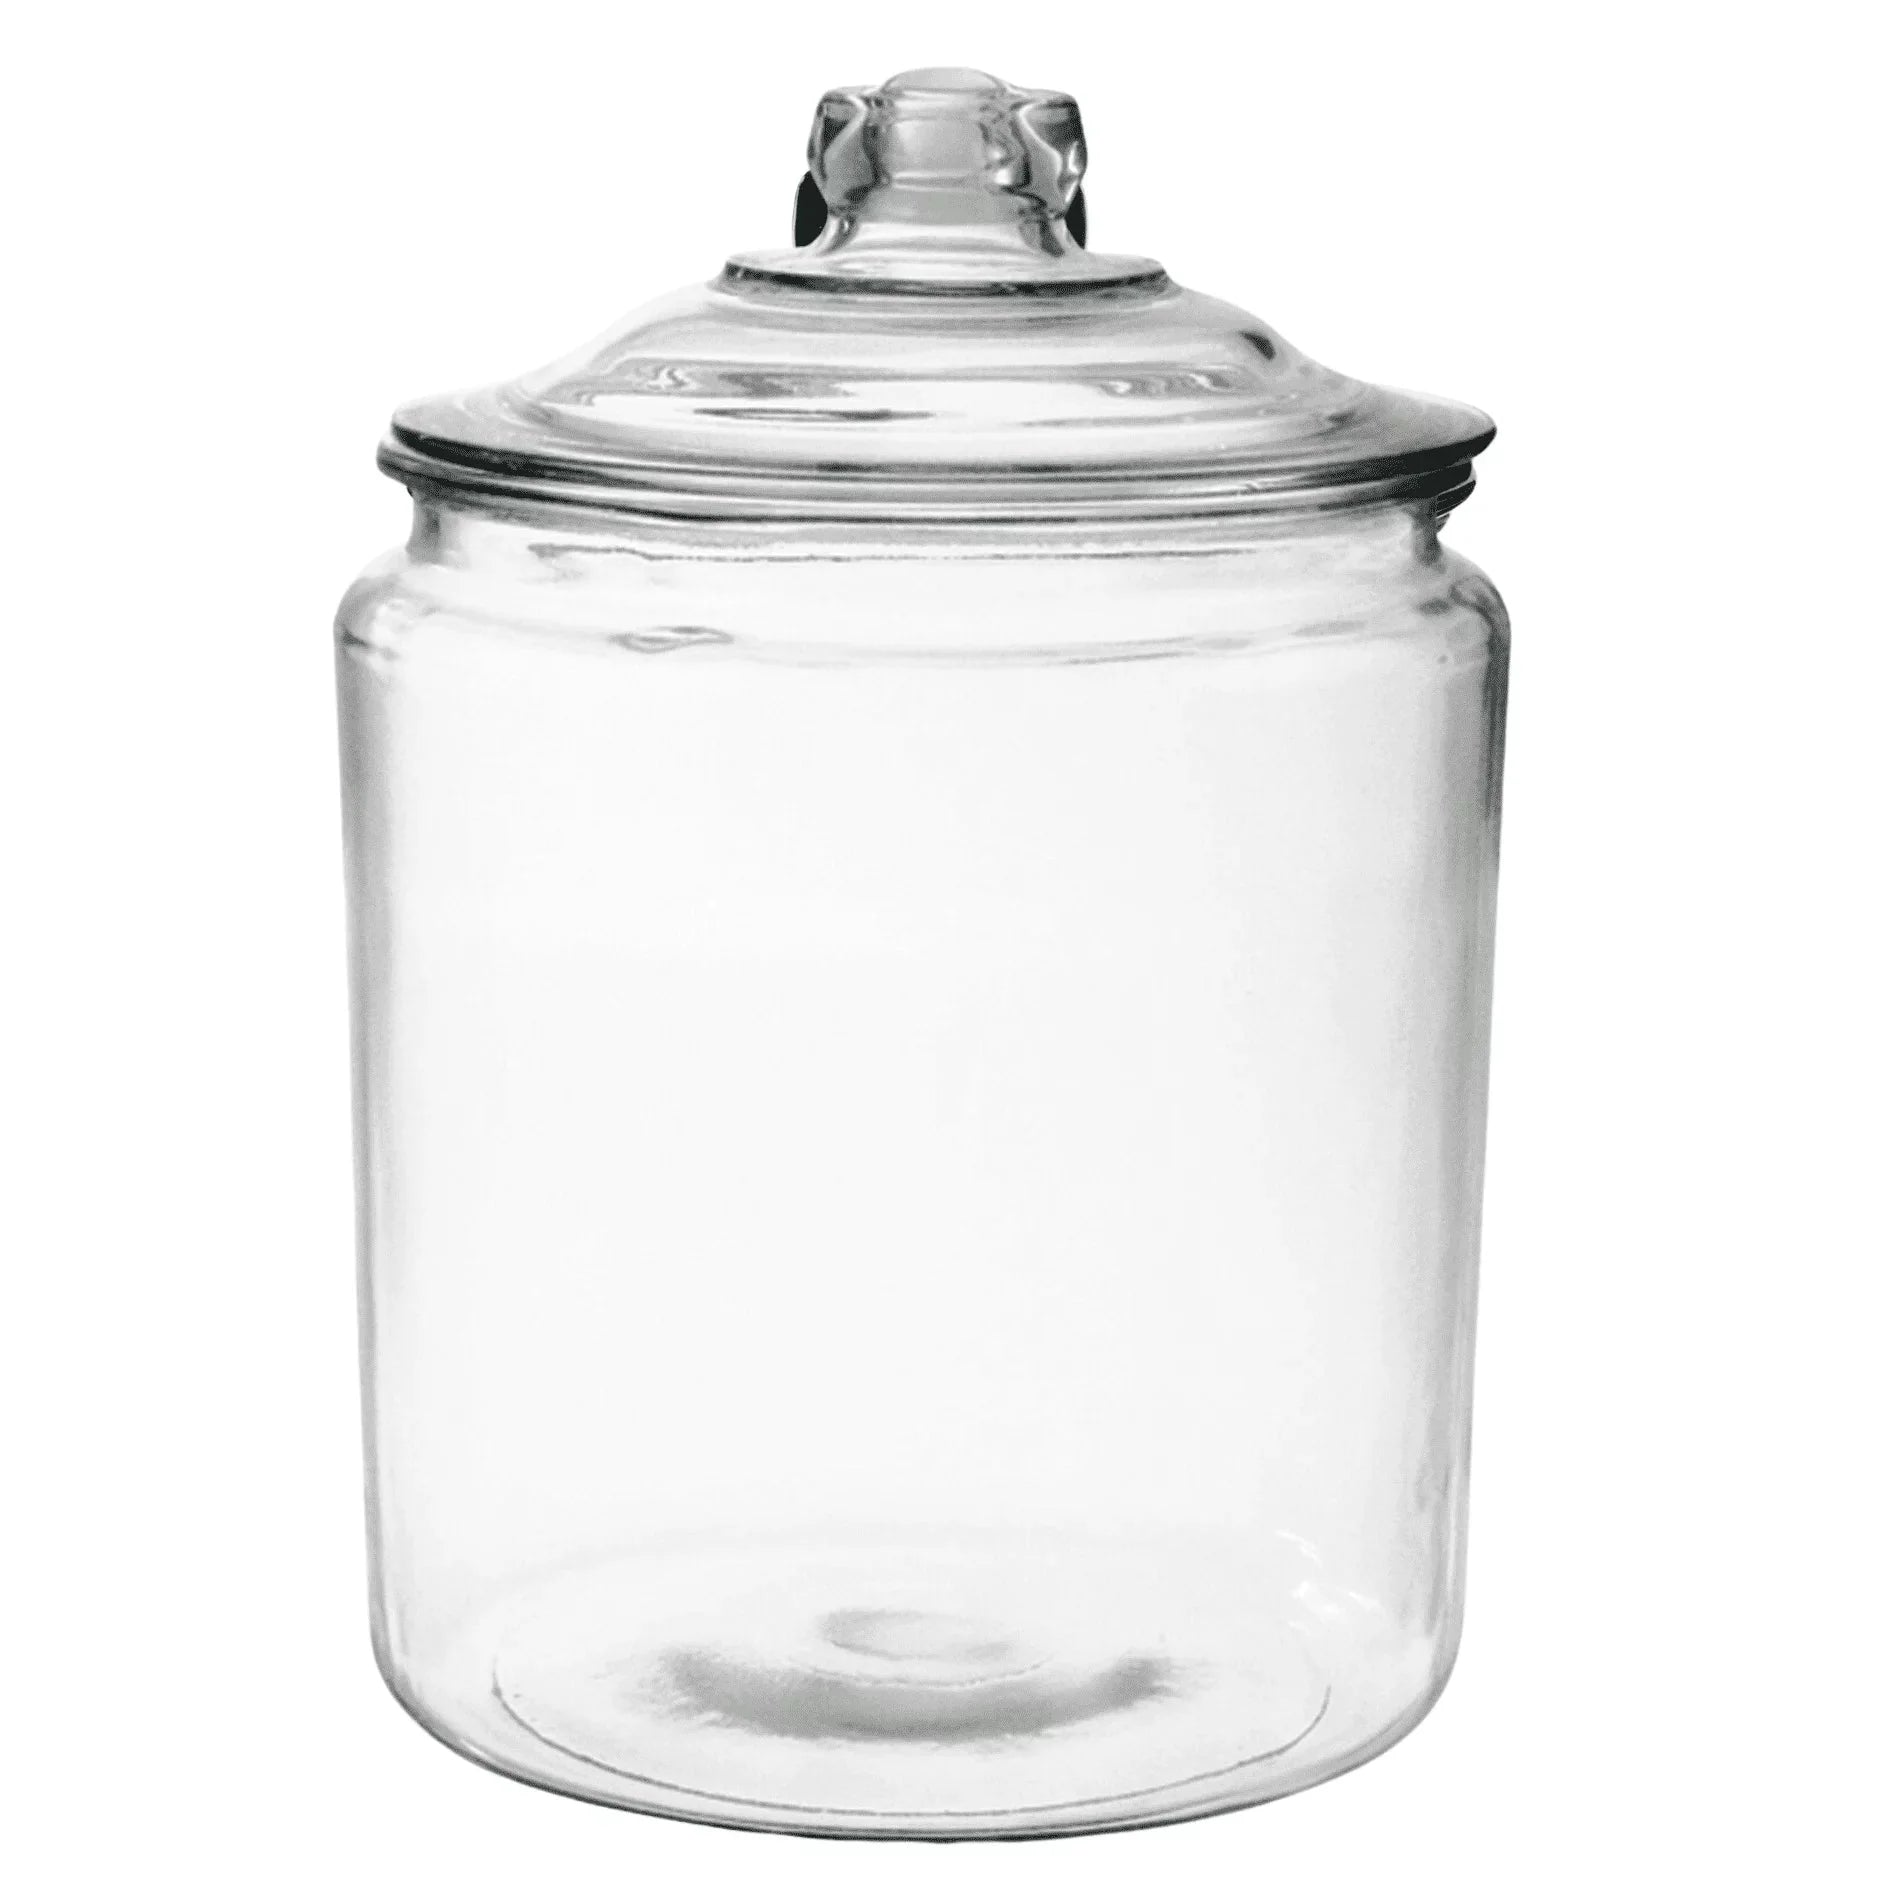 Wholesale prices with free shipping all over United States Anchor Hocking Heritage Hill Glass Jar with Lid, 2 Gallon - Steven Deals